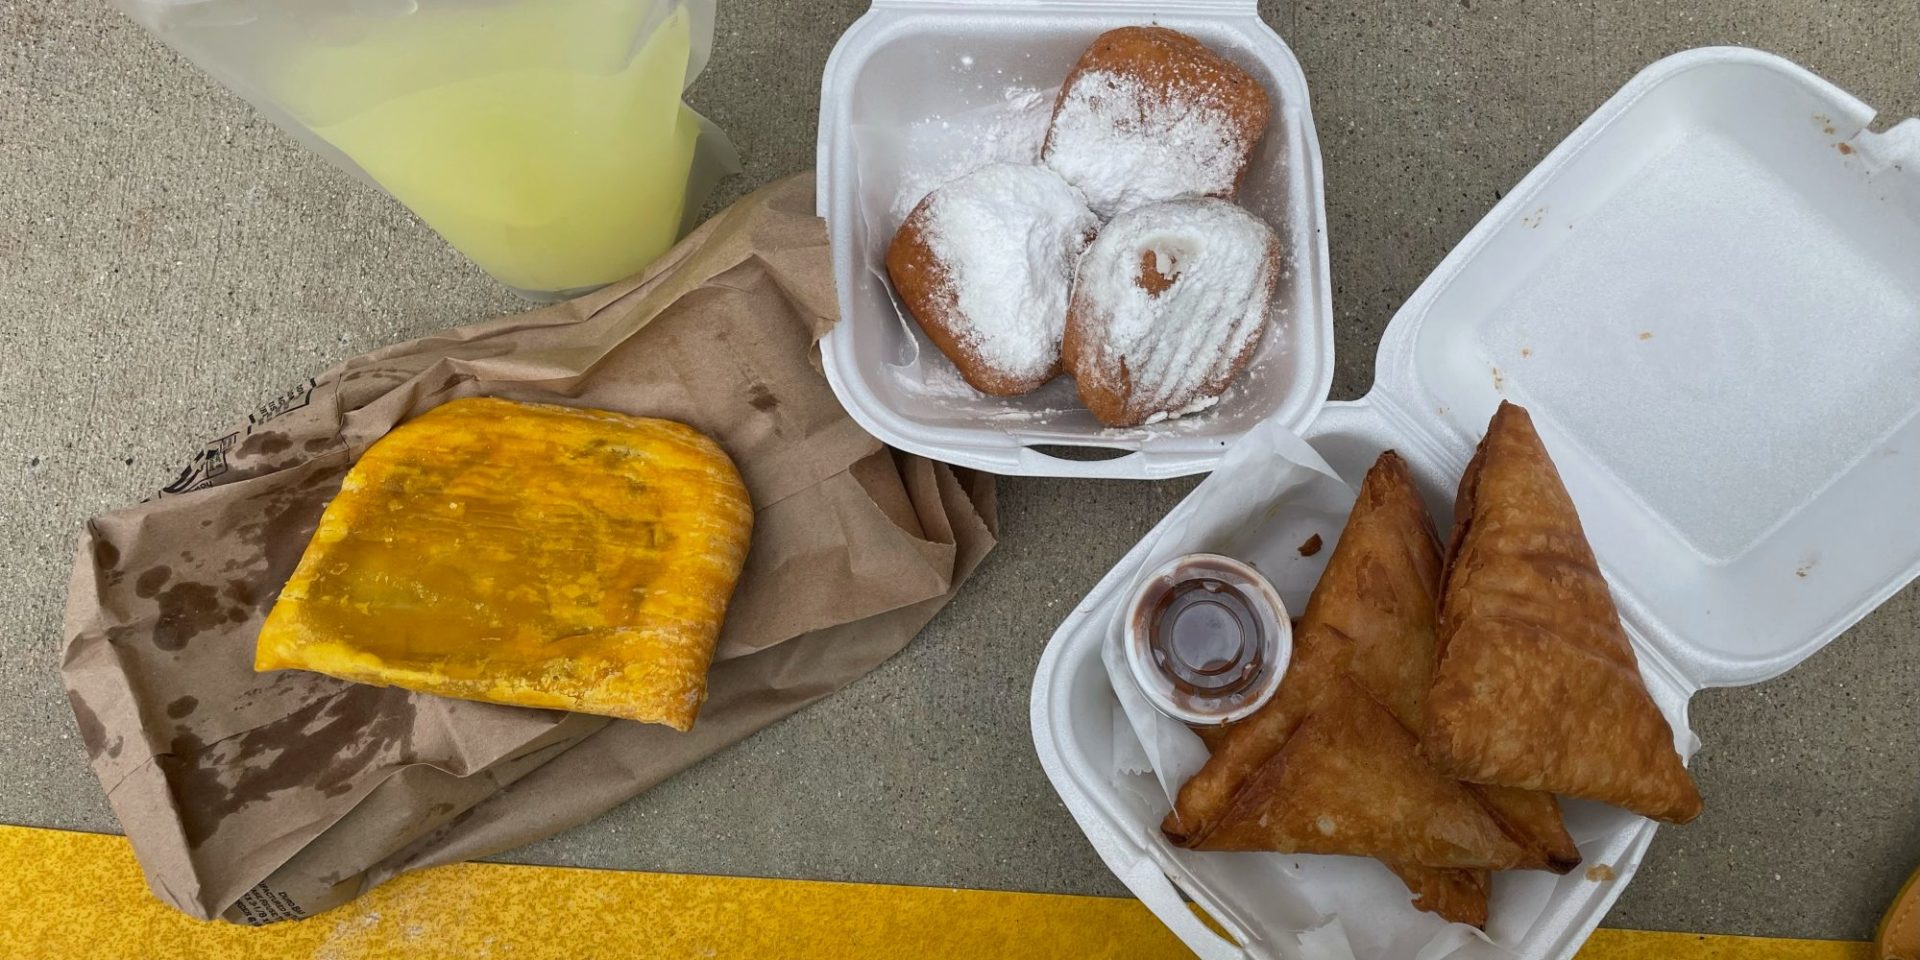 The author's order at Stango Cuisine: ginger juice in a plastic bag, a beef handpie on a brown paper bag, a white styrofoam container of beignets, and three somaosas with a side sauce.